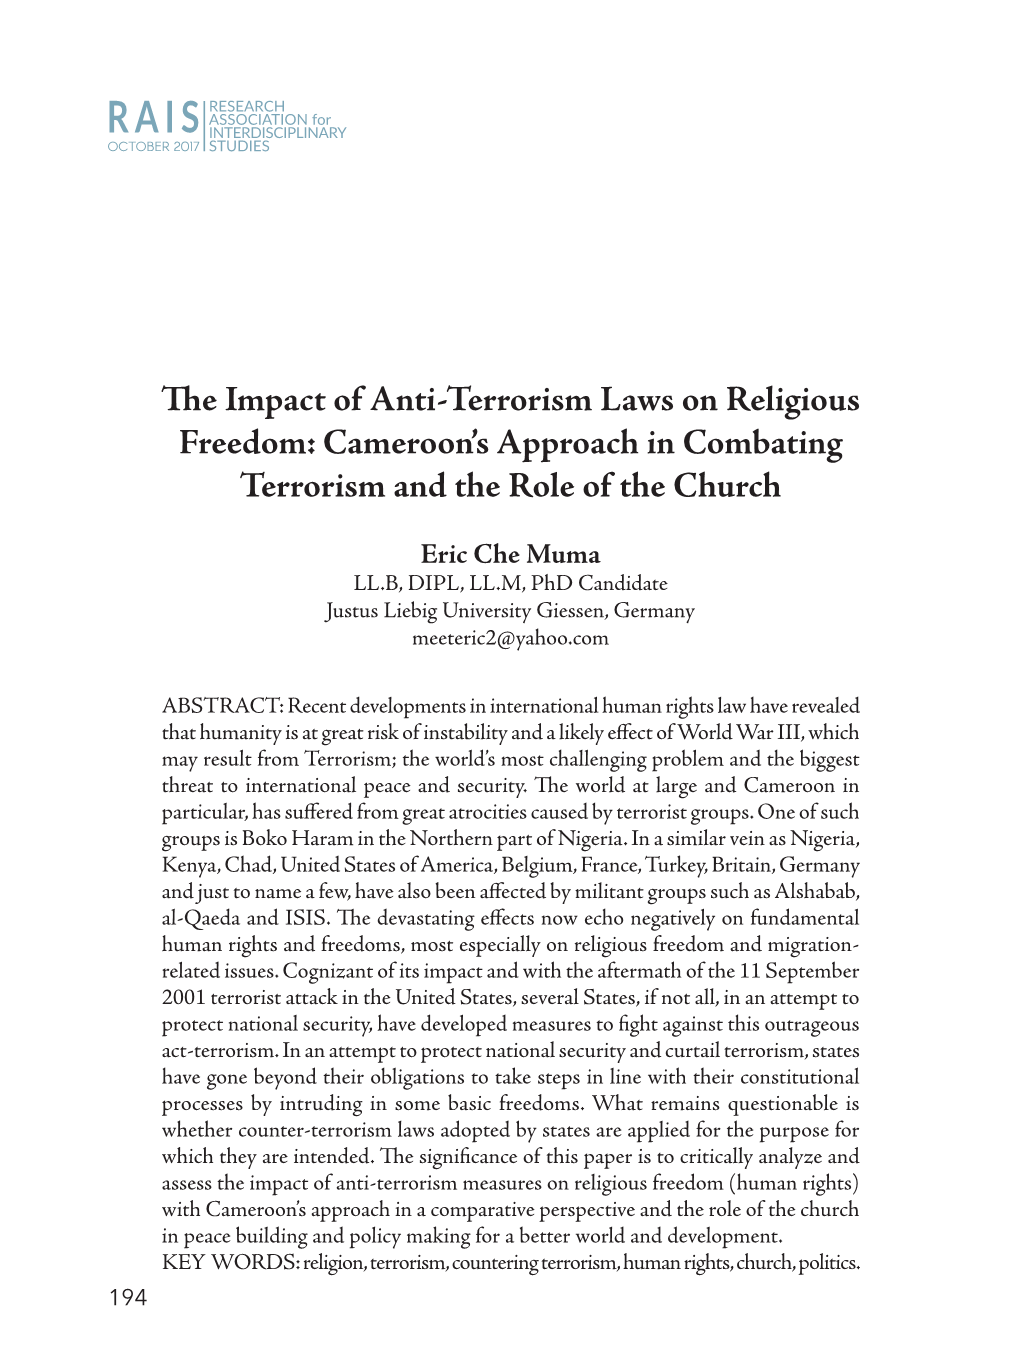 The Impact of Anti-Terrorism Laws on Religious Freedom: Cameroon’S Approach in Combating Terrorism and the Role of the Church